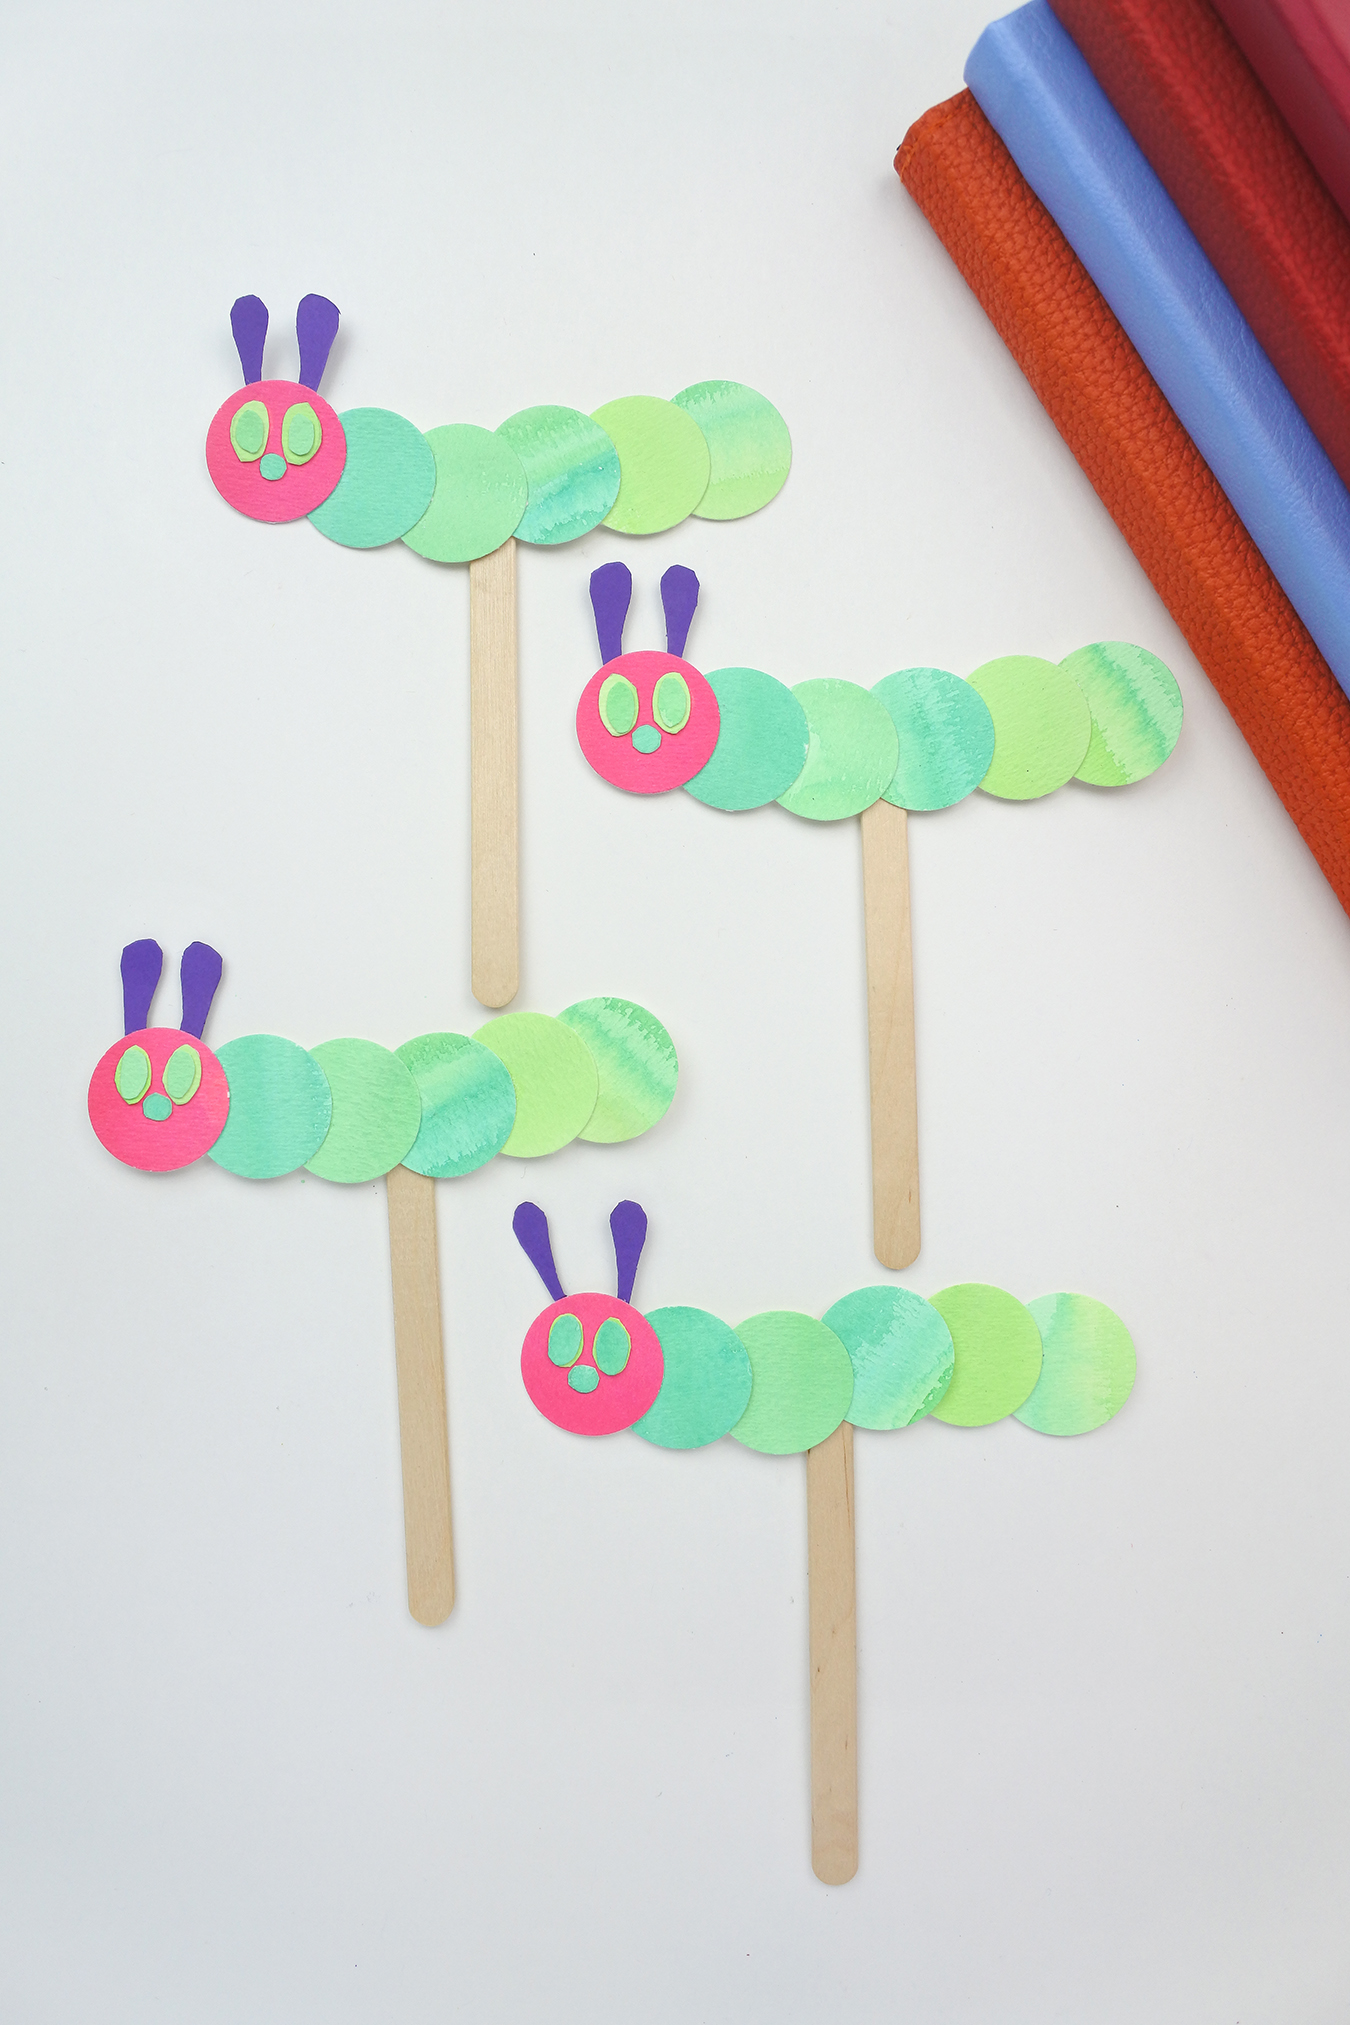 The Very Hungry Caterpillar Inspired Bookmark for www.tombowusa.com by @thediyday